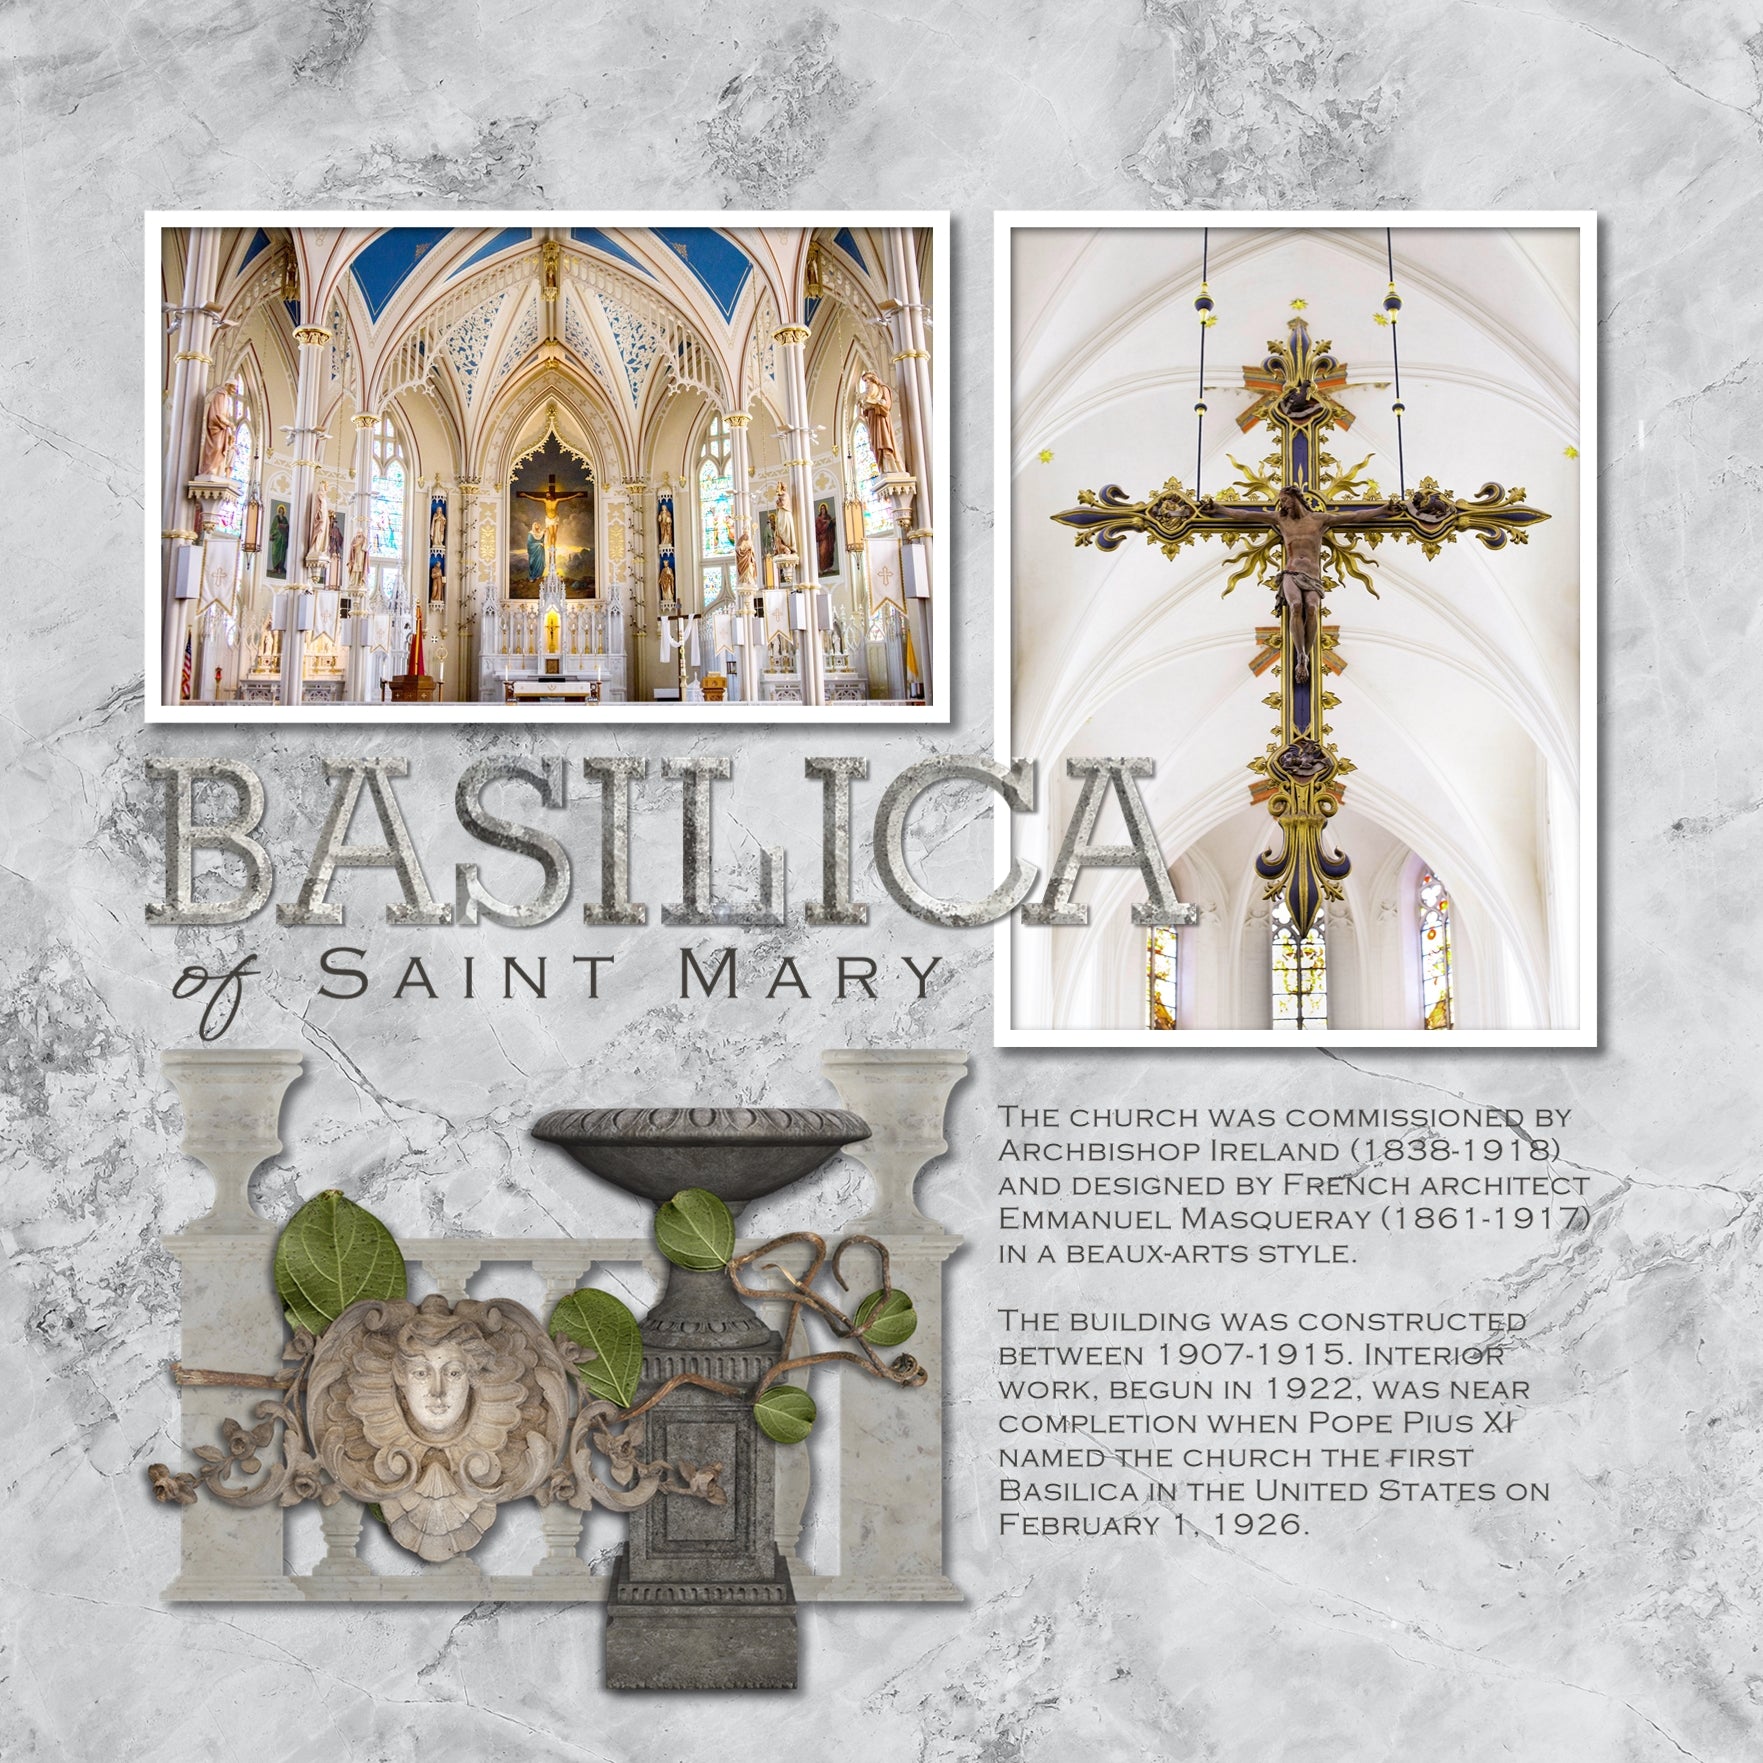 The Ornate Architecture Digital Scrapbook Bundle features authentic digital art antique architectural stone artifacts, metal pieces, plus versatile granite and marble papers. Great for layering pieces on visits to the museum or vacations to historic sites. Features marble statues, architecture details such as arches, doors, windows, columns, stairs, balusters and railings, baptism font, stone fireplaces, topiaries, decorative architectural details, and more.